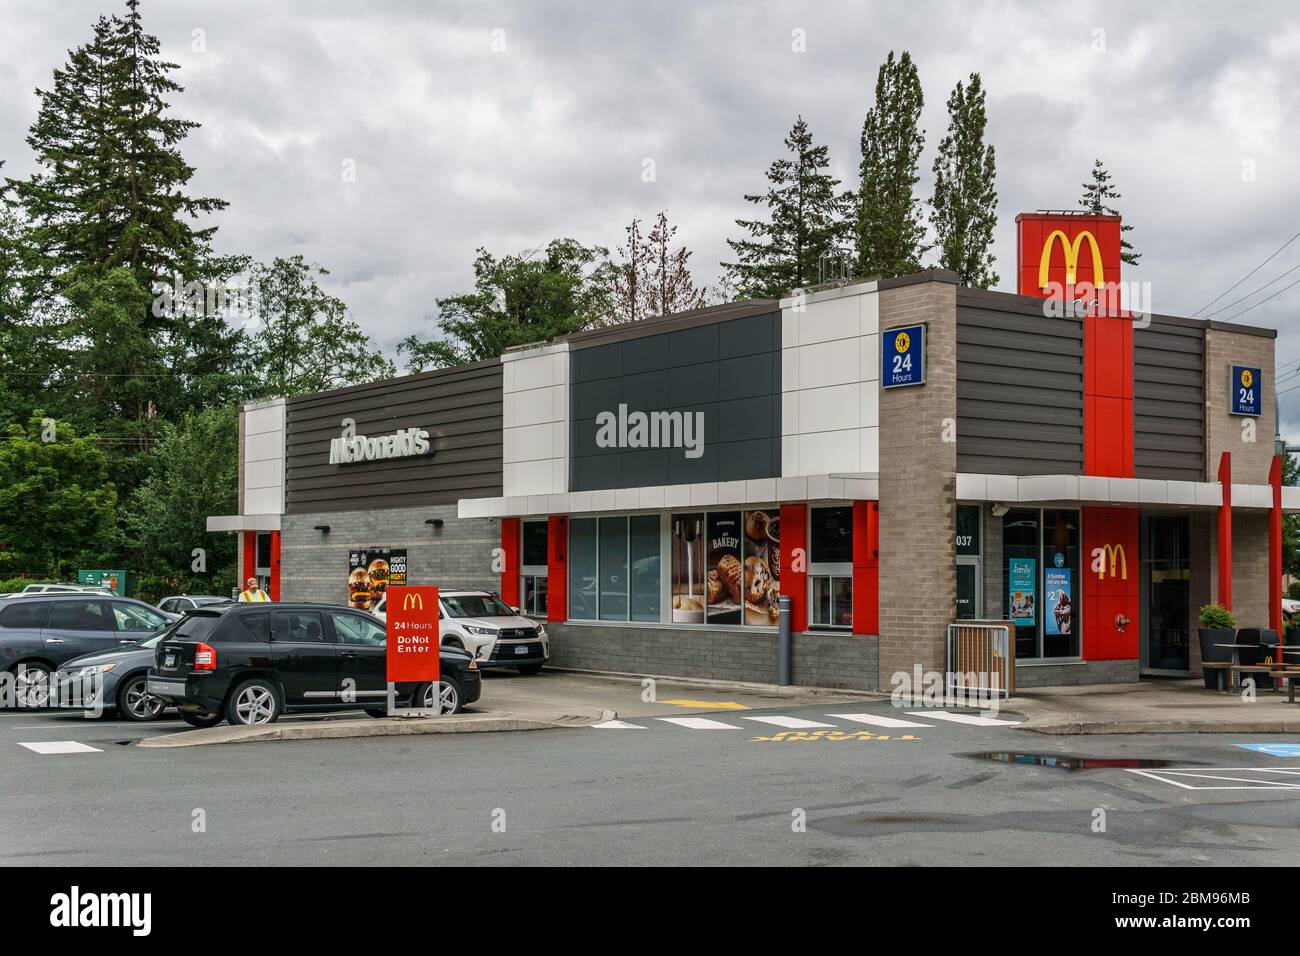 LANGLEY, CANADA - JULY 10, 2019: McDonald's restaurant building with cars on parking spot and green trees. Stock Photo